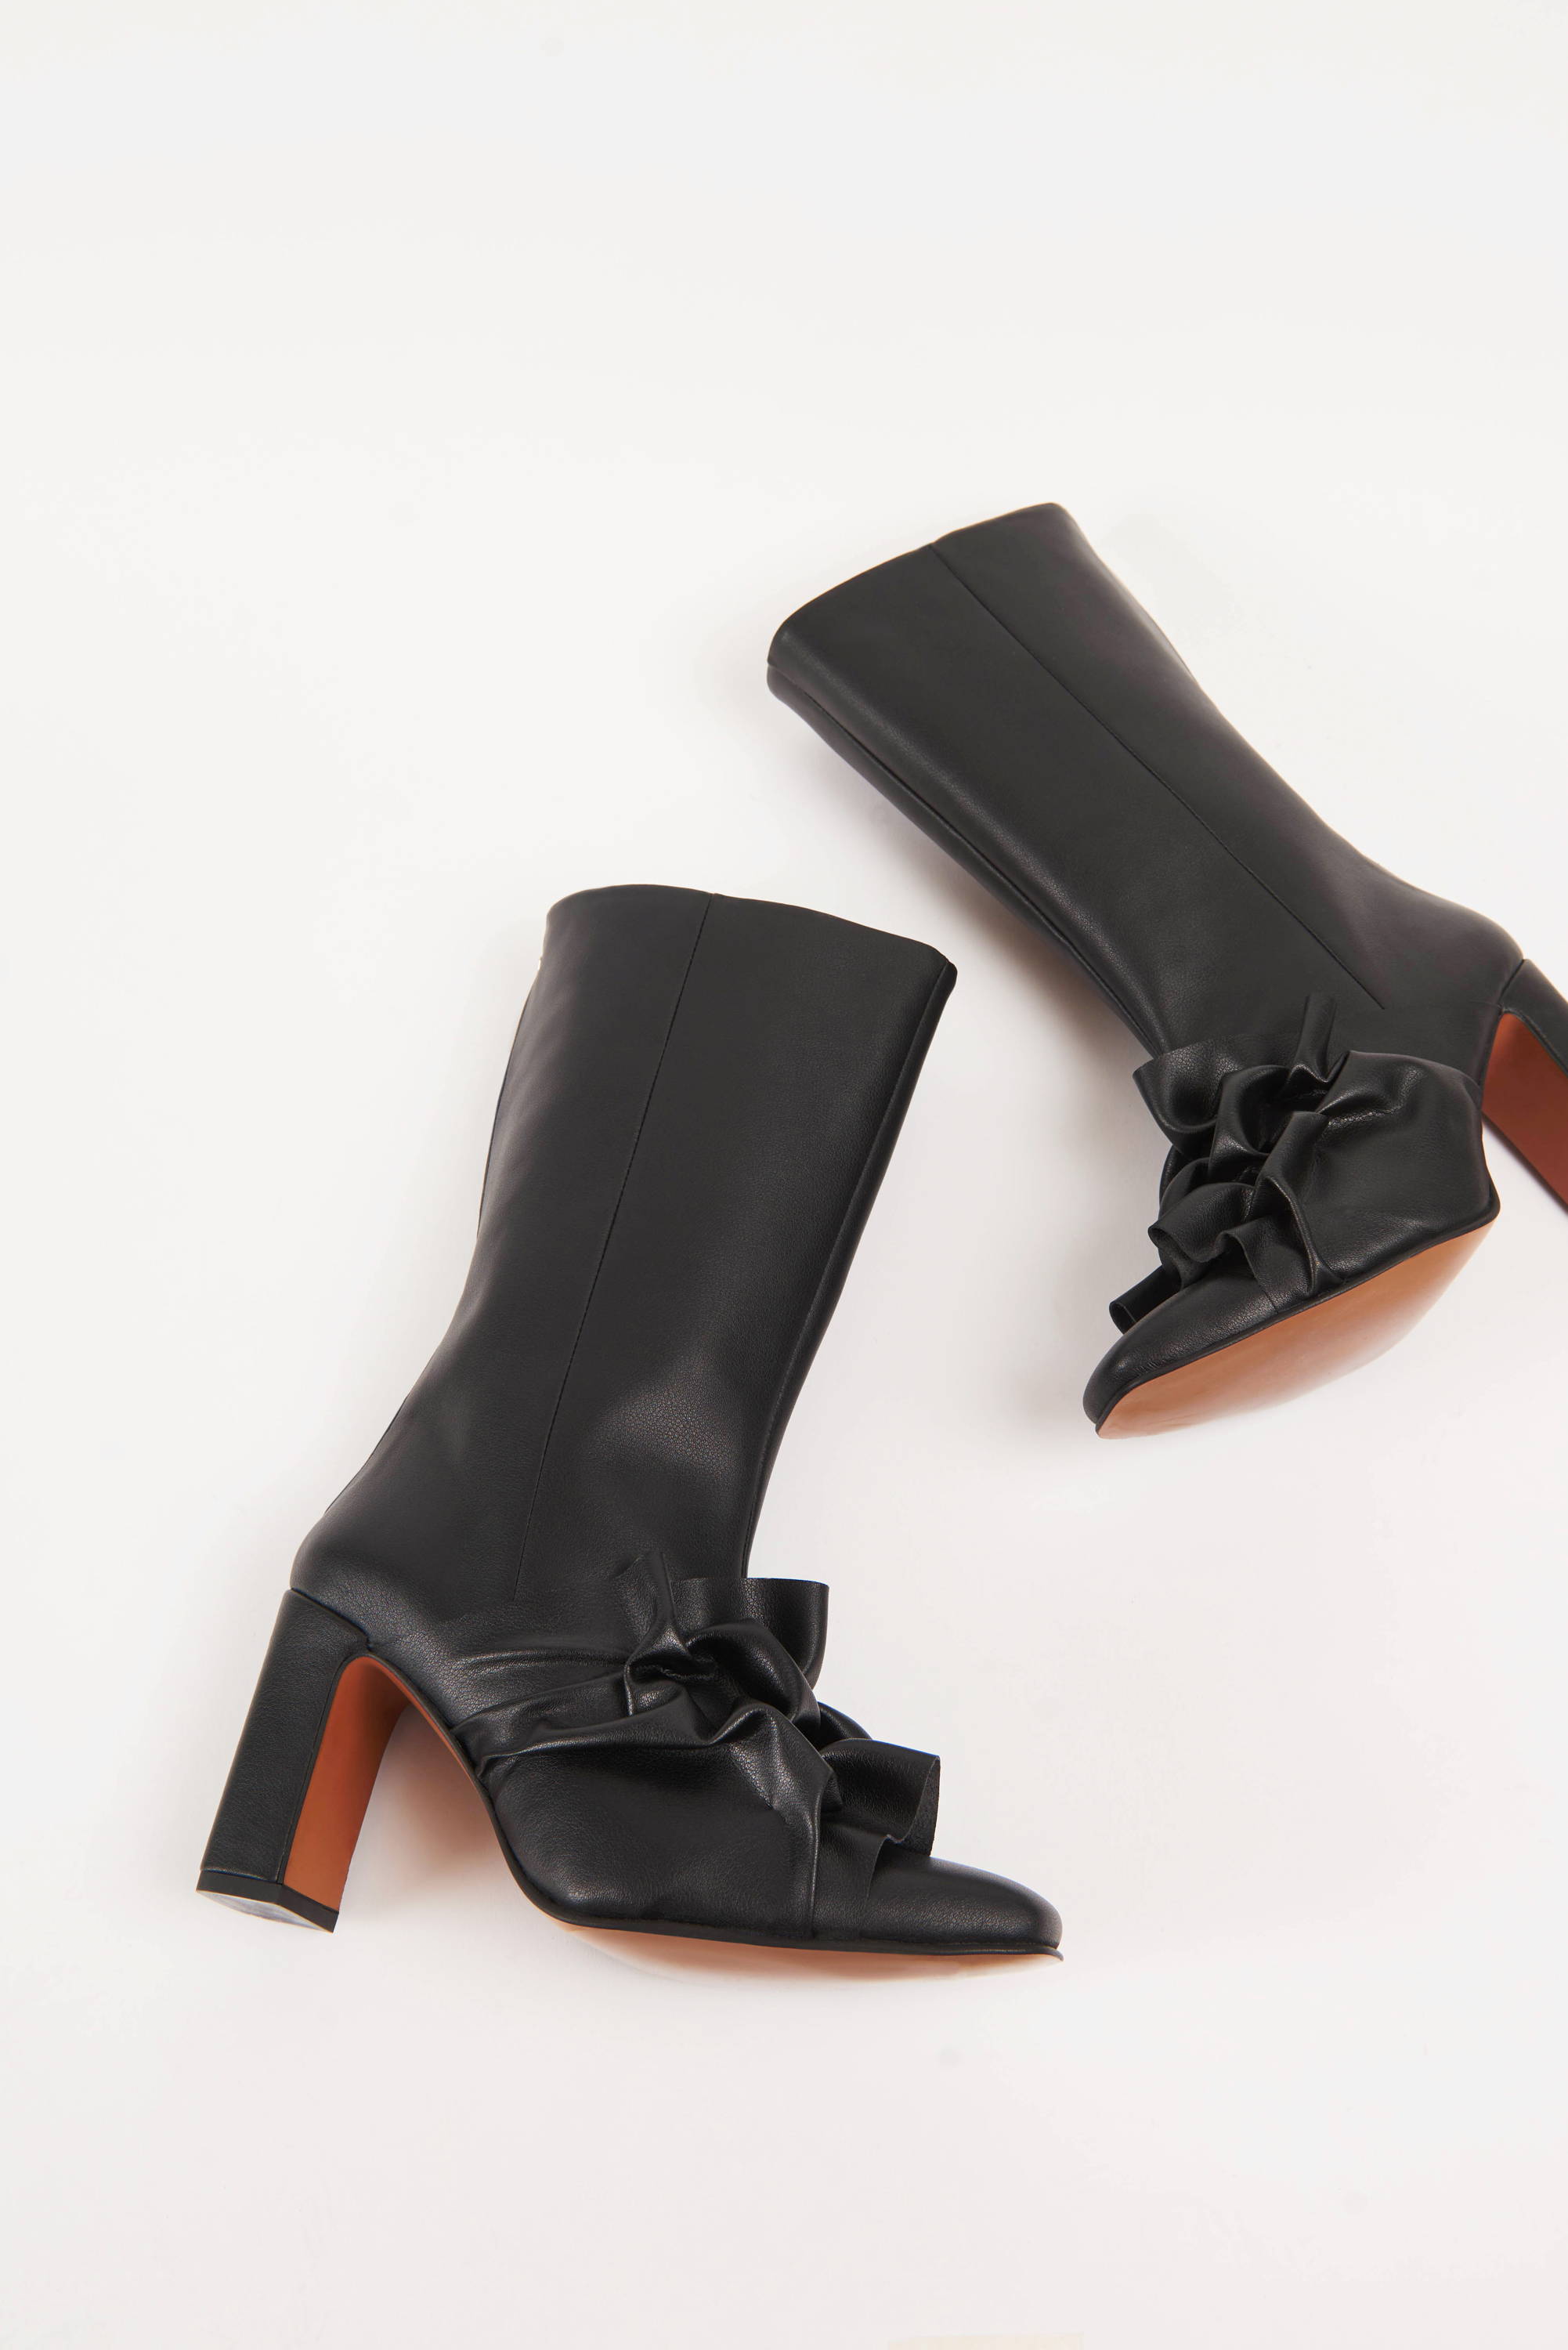 A pair of Vandrelaar black high-heel ankle boots made from vegan leather with brown sole featuring canadian smocking detailing